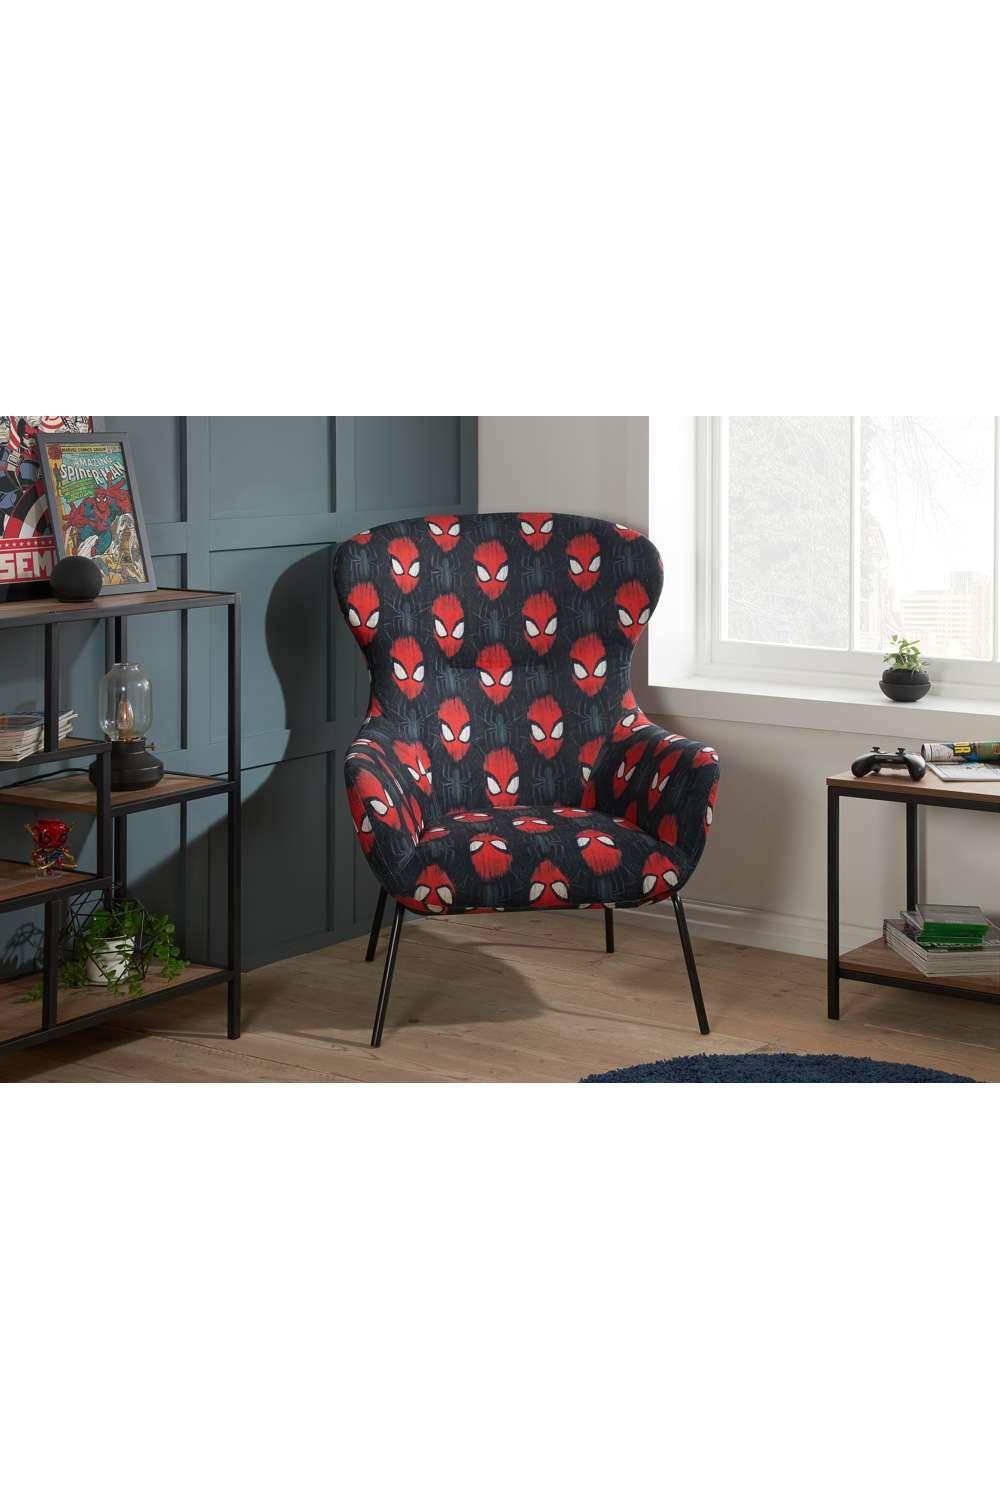 Spider-man Occasional Chair